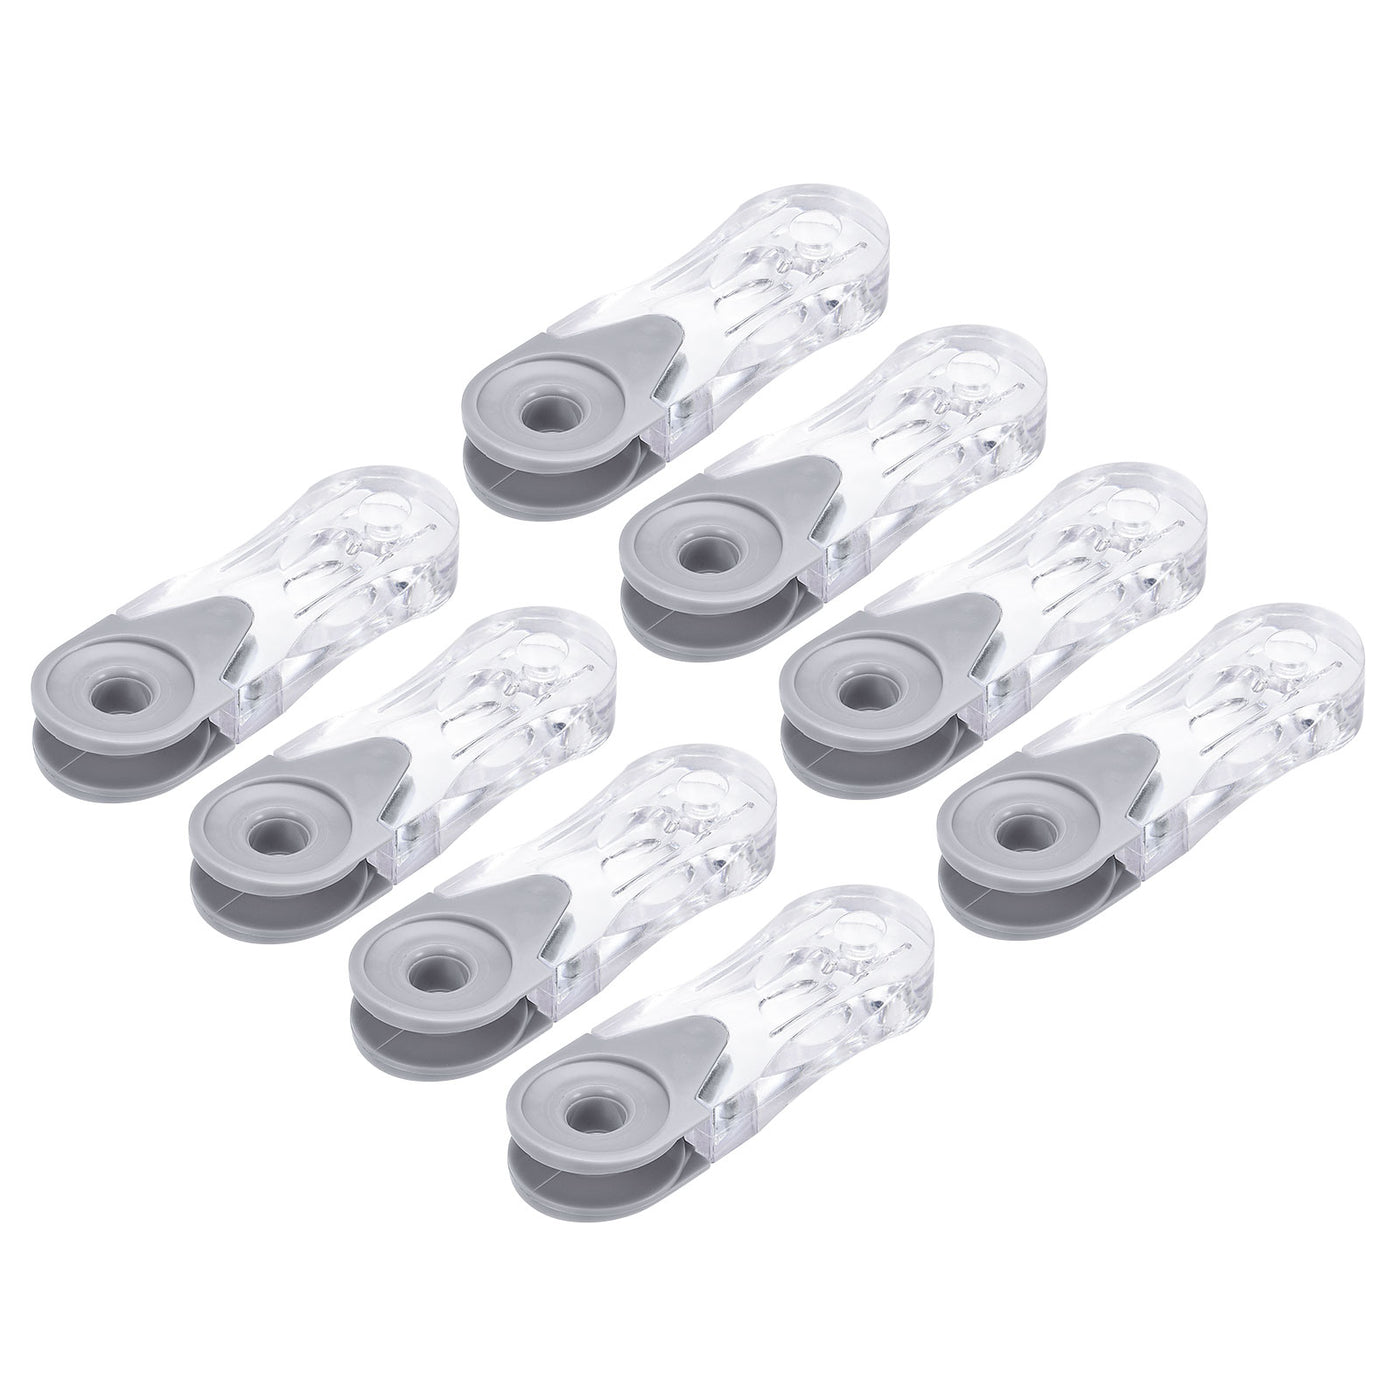 uxcell Uxcell Blinds Chain Handles, 8Pcs 90mm Roller Shade Cord Weights for Window Parts, Grey